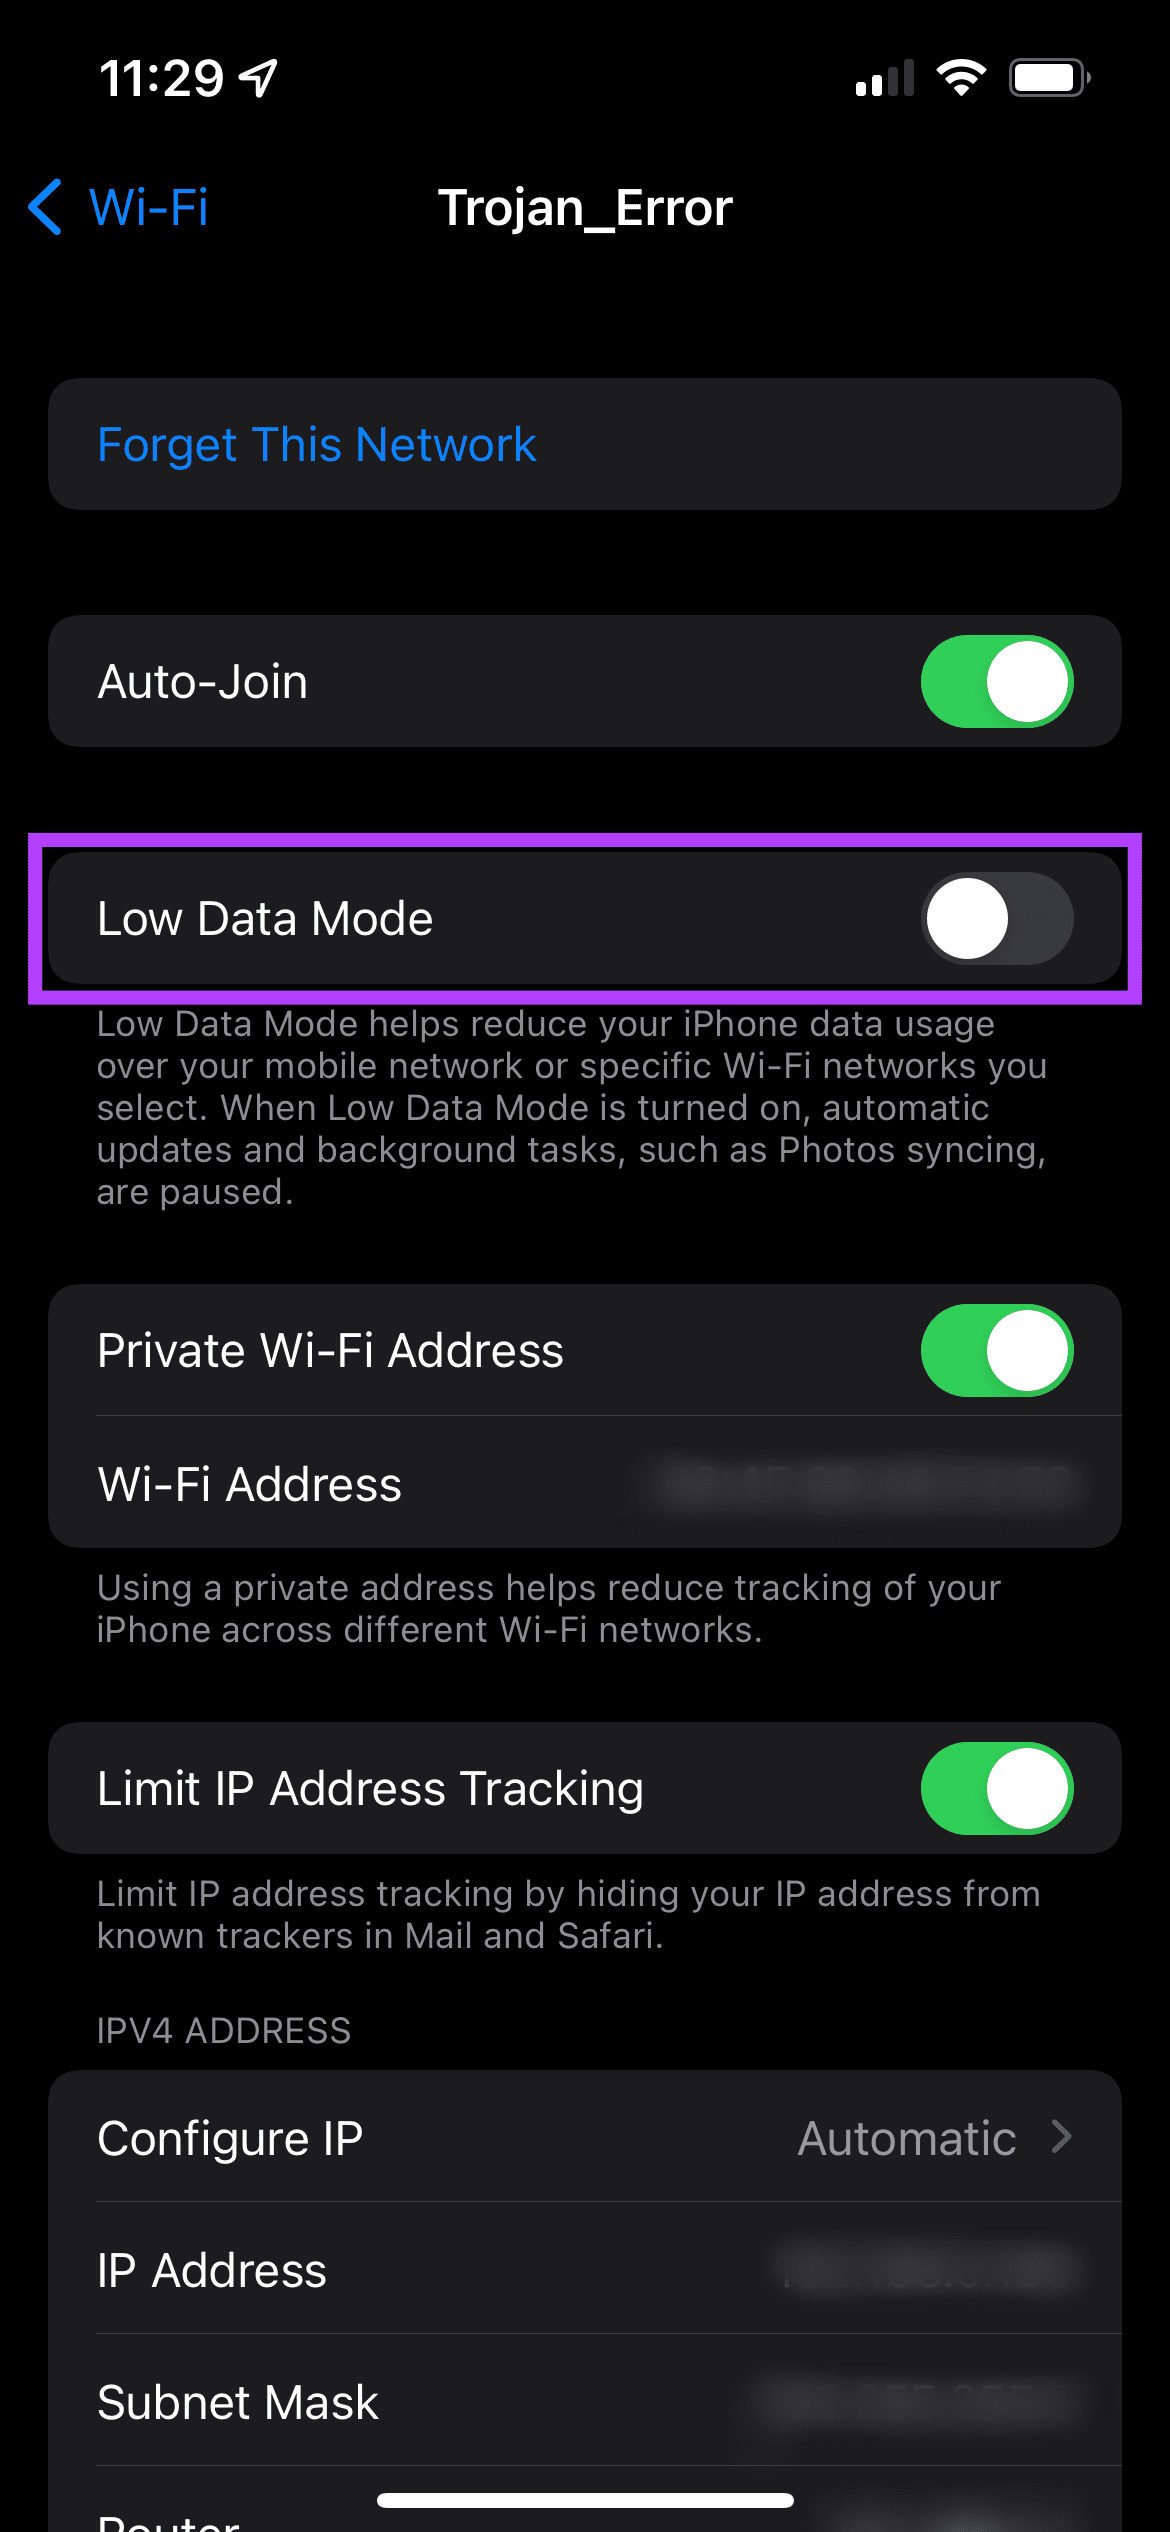 Low Data Mode